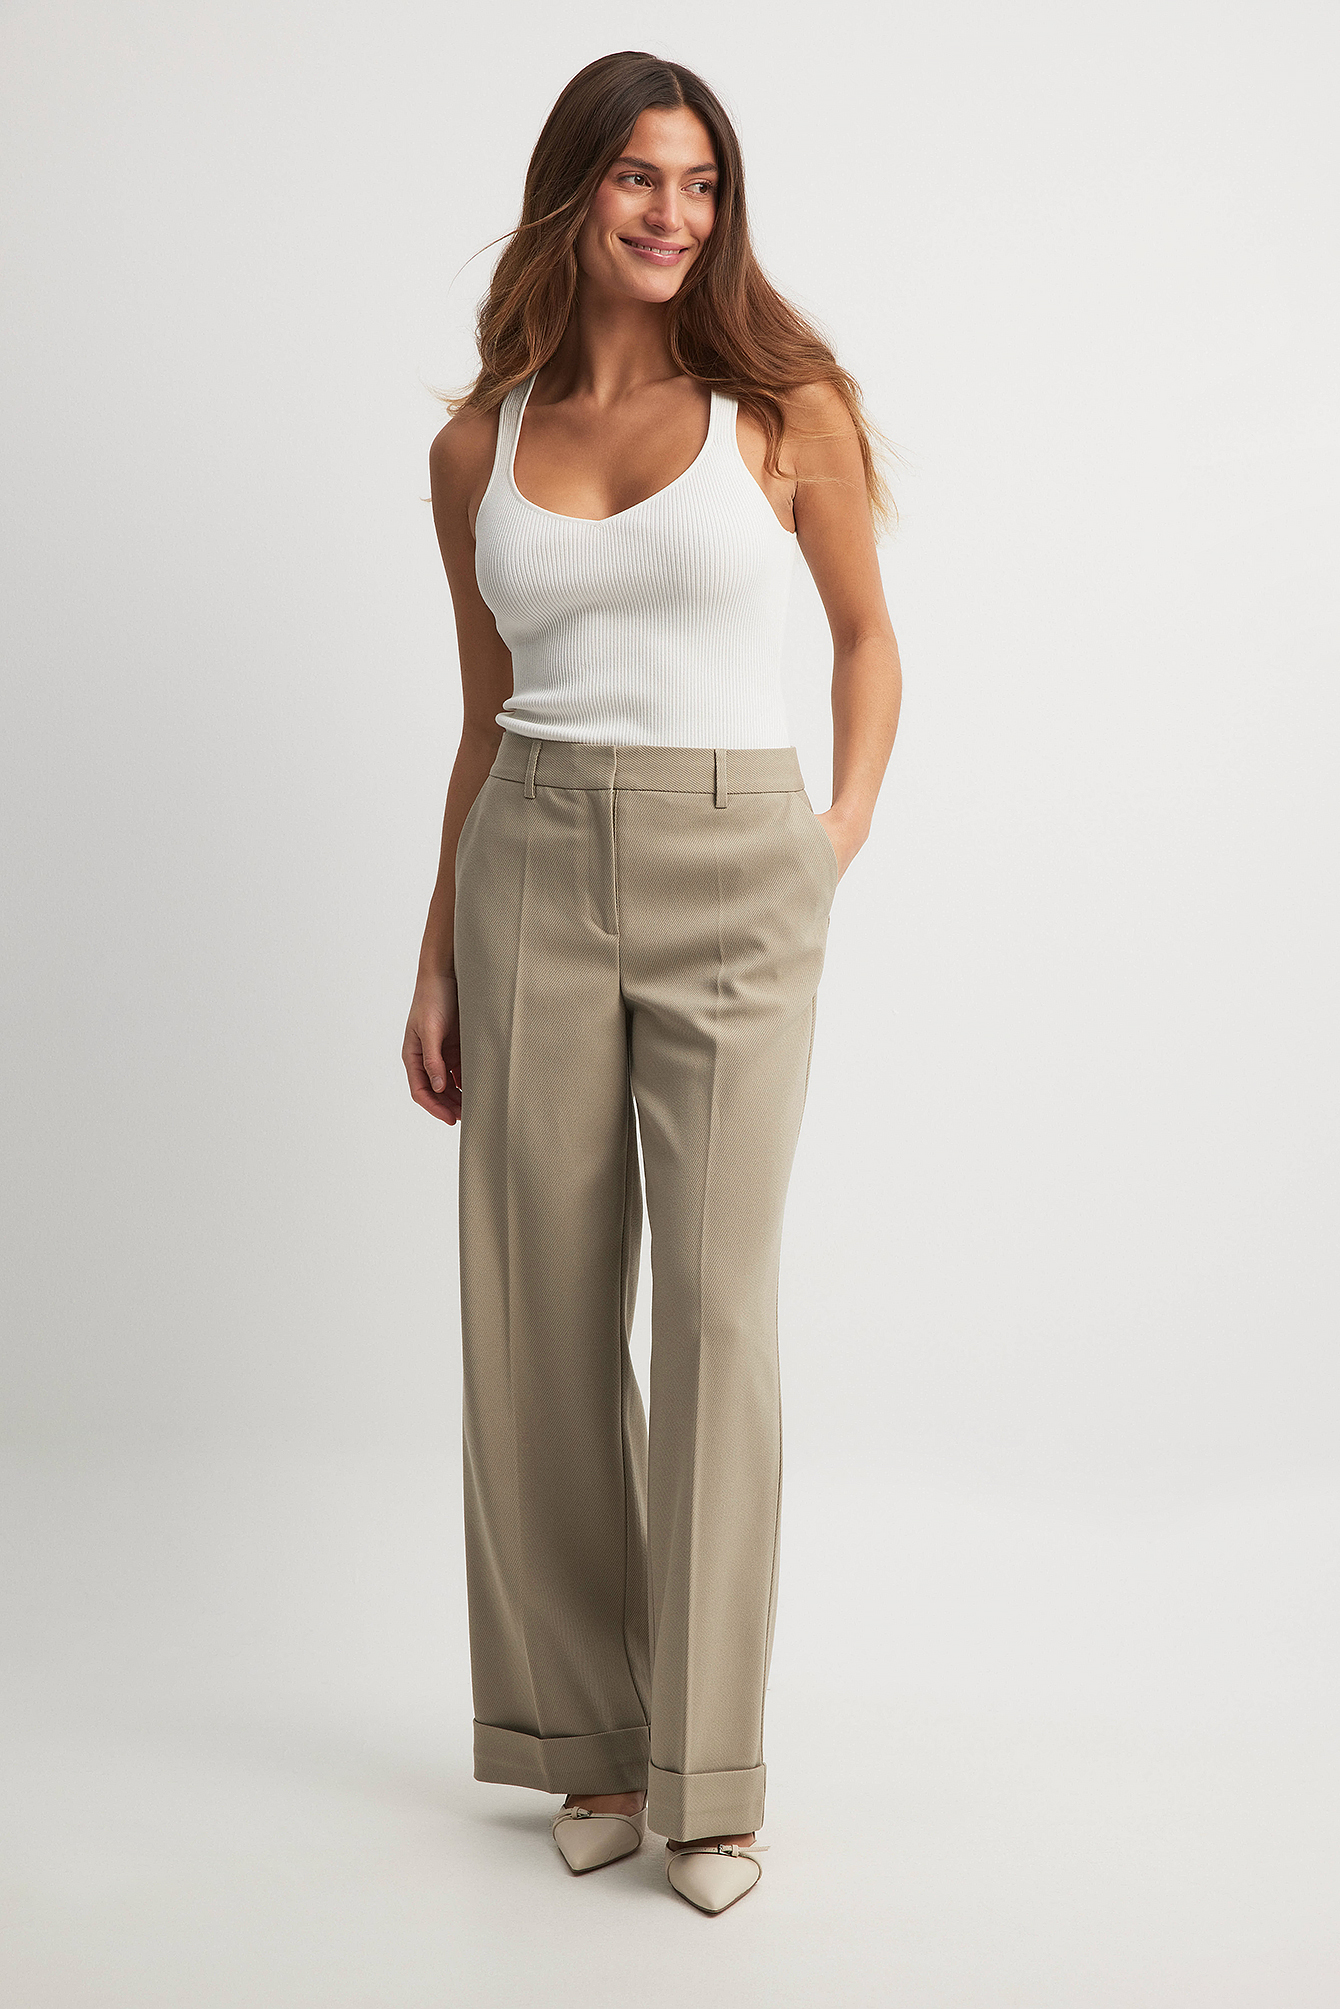 Two piece suit with vest and wide leg trousers by Cloche.ro